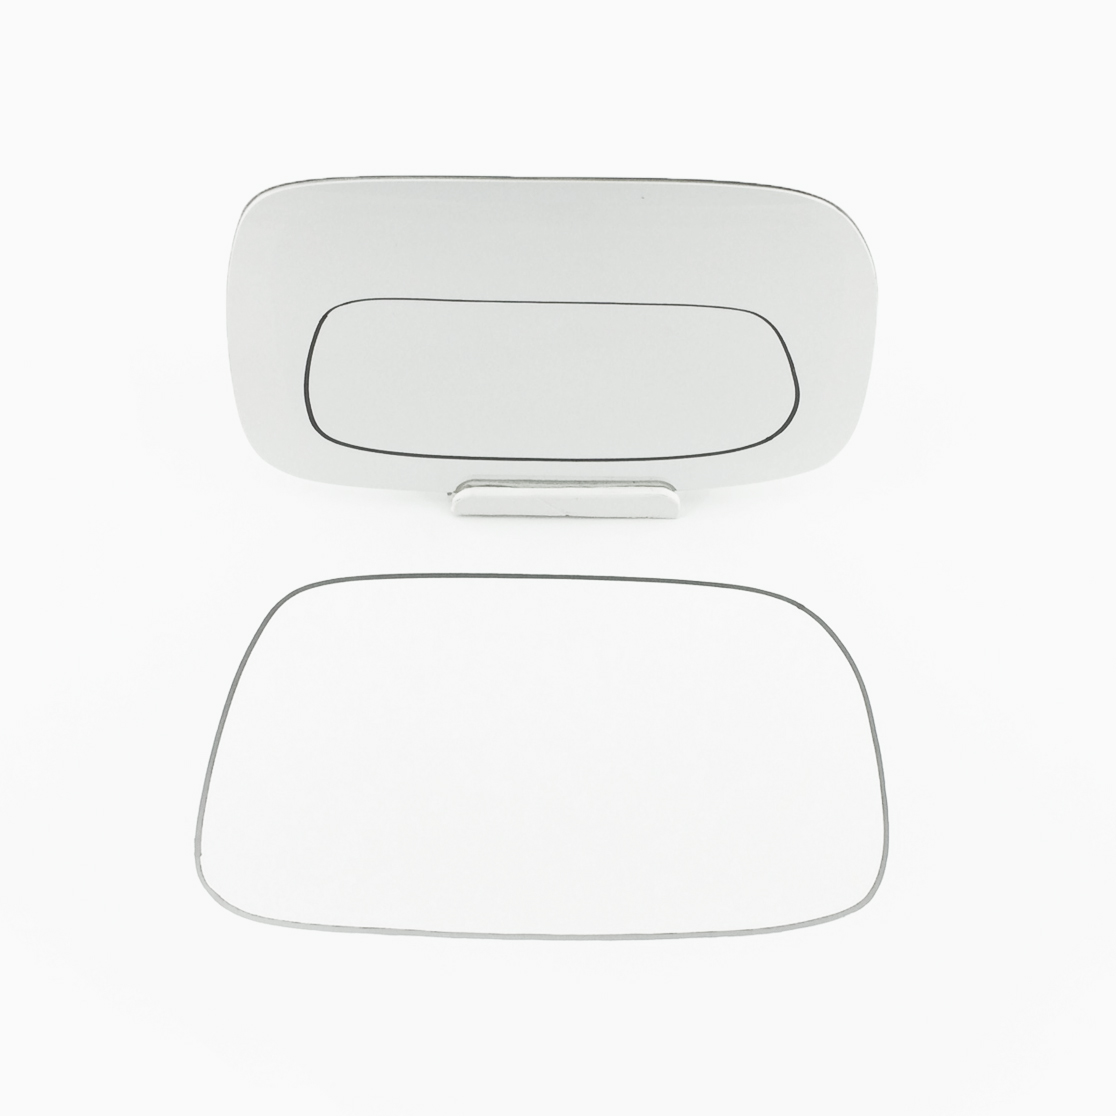 Toyota Corolla Wing Mirror Glass RIGHT HAND ( UK Driver Side ) 1998 to 2001 – Convex Wing Mirror